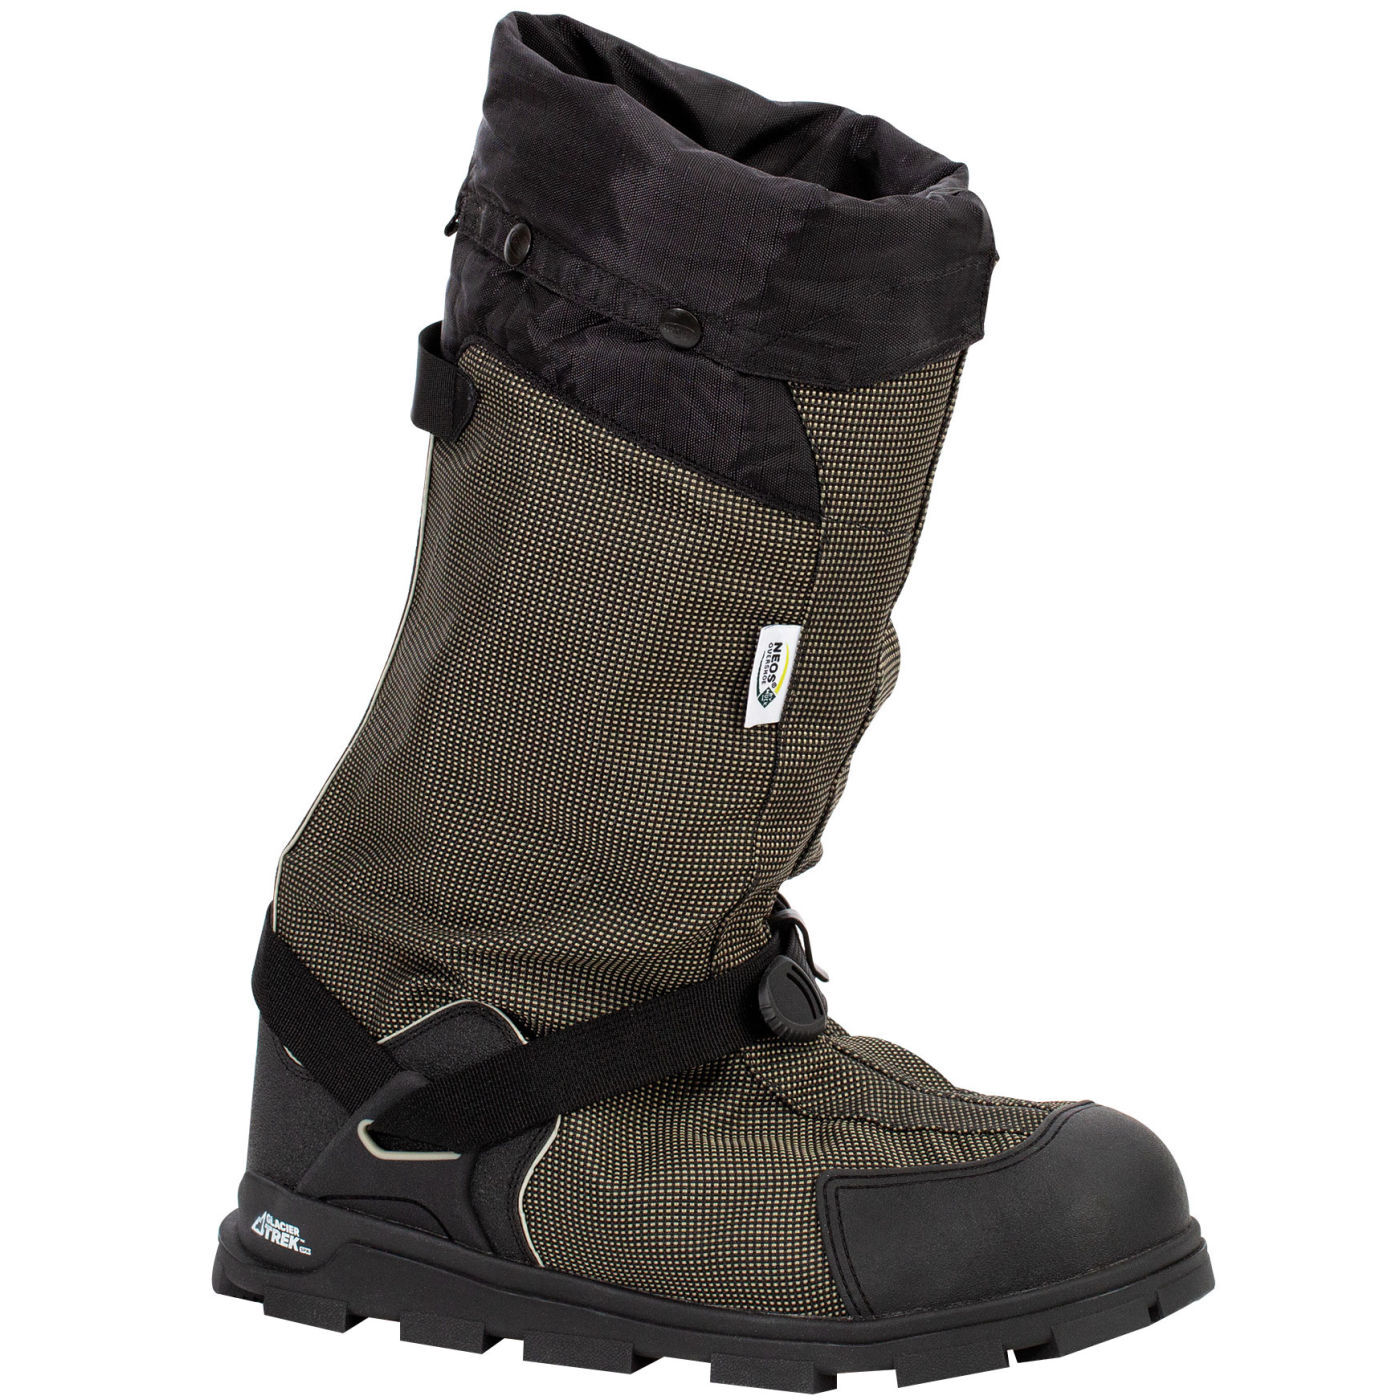 NEOS Navigator Glacier Trek SPK Insulated Overshoe + Cleats from Columbia Safety